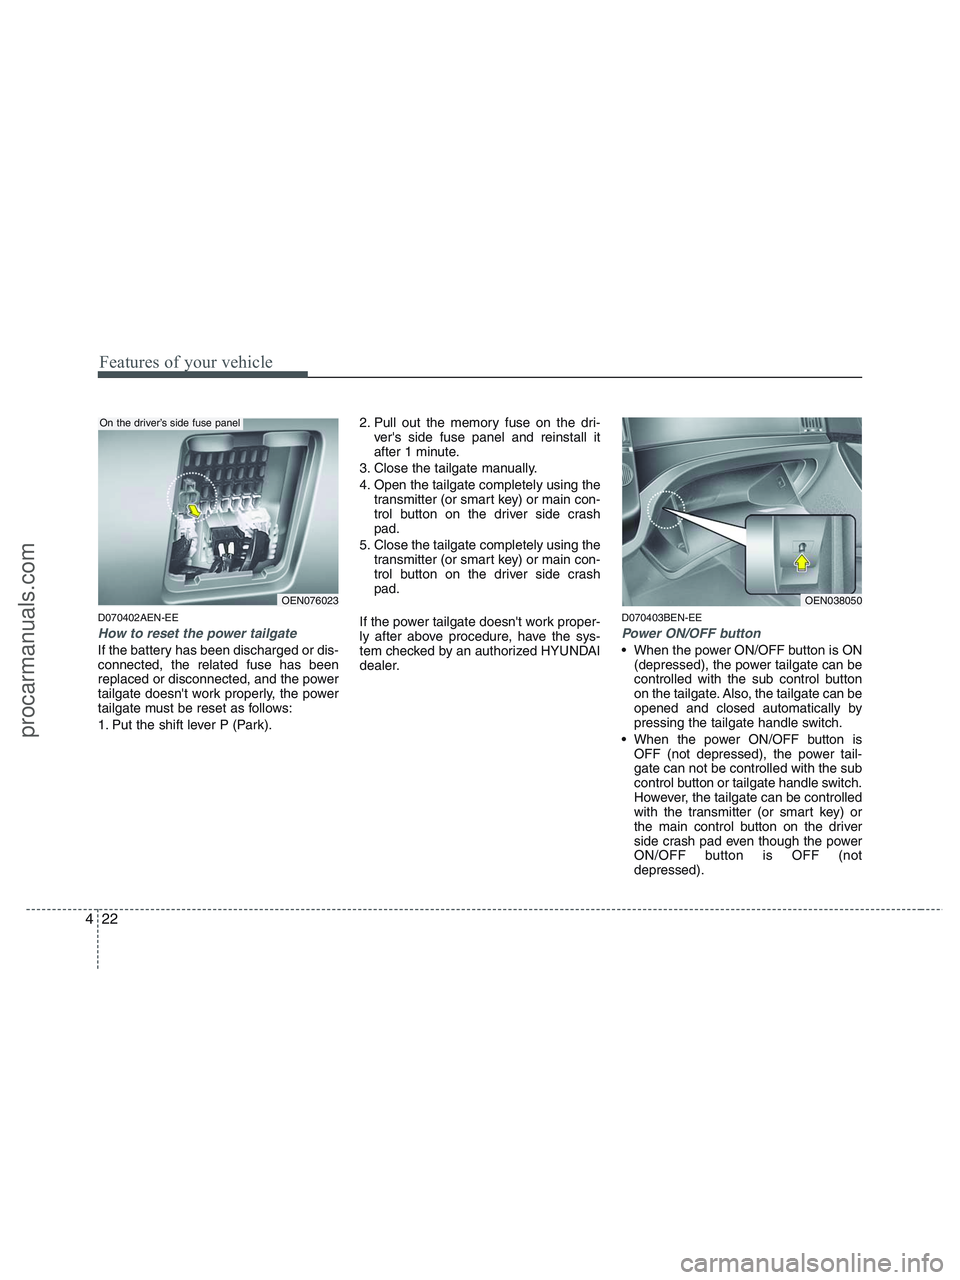 HYUNDAI VERACRUZ 2010  Owners Manual Features of your vehicle
22 4
D070402AEN-EE
How to reset the power tailgate
If the battery has been discharged or dis-
connected, the related fuse has been
replaced or disconnected, and the power
tail